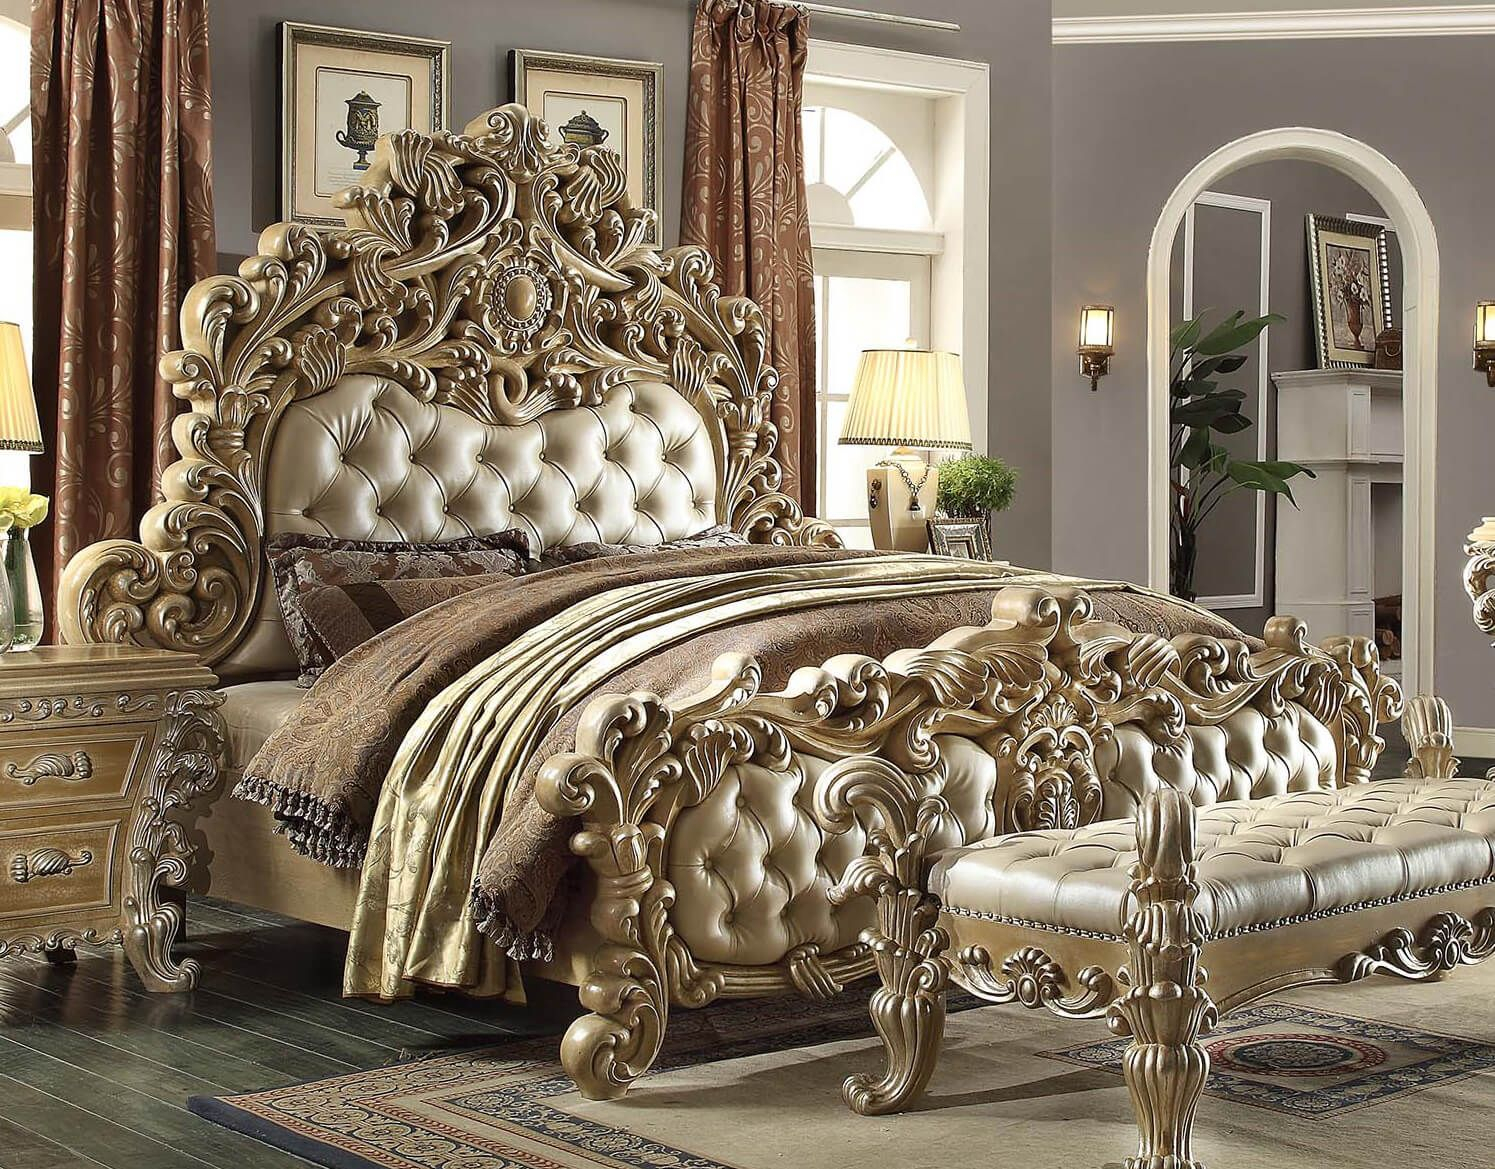 Homey Design Royal Kingdom Hd 7012 Bed In 2019 Beautiful Bedrooms with regard to dimensions 1495 X 1169